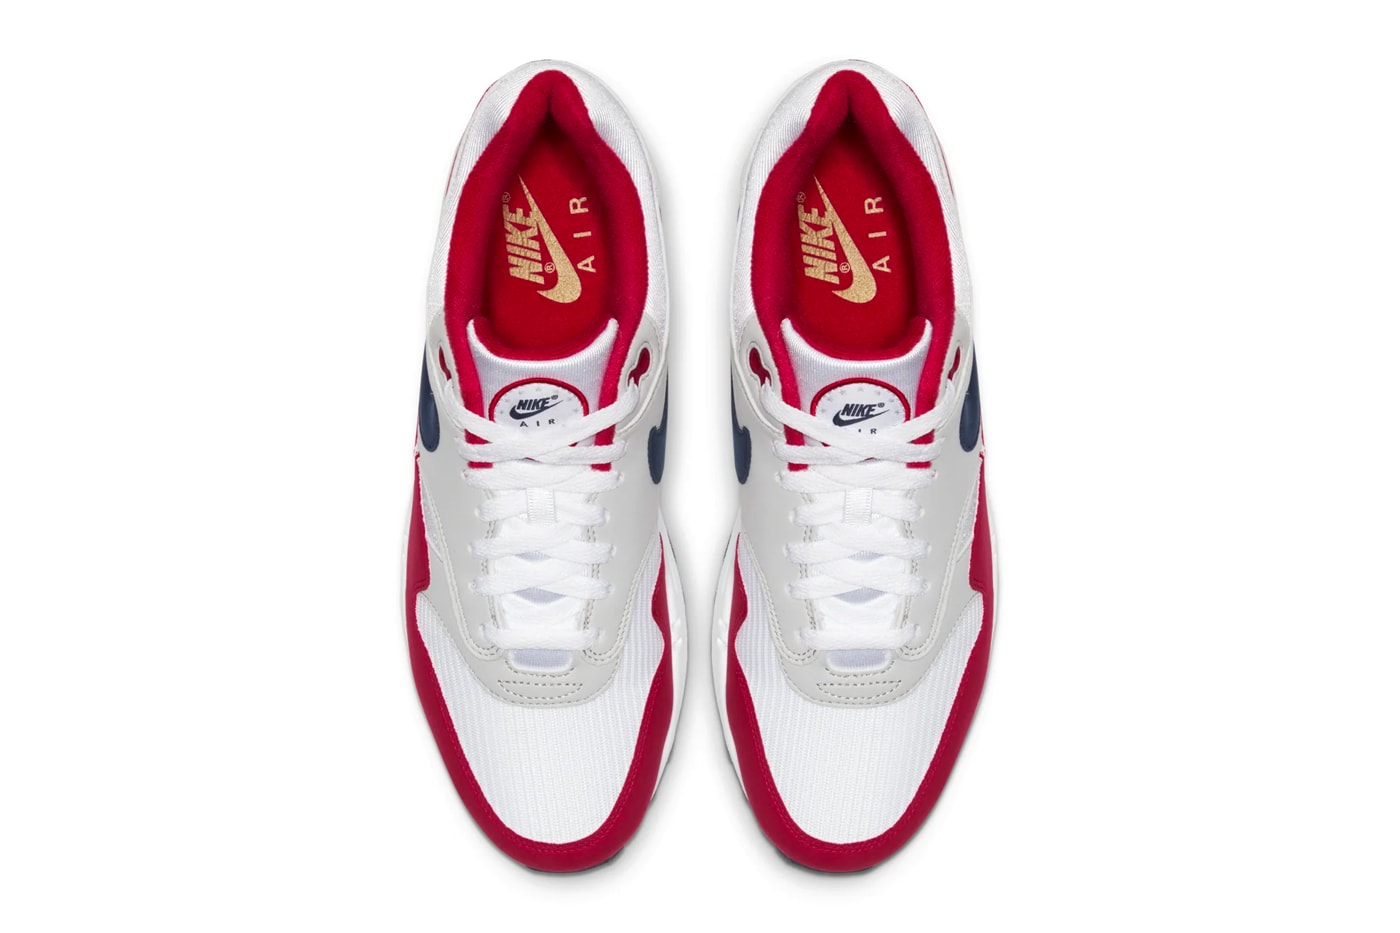 Nike Air Max 1 Fourth of July Release Info CJ4283-100 red white flag